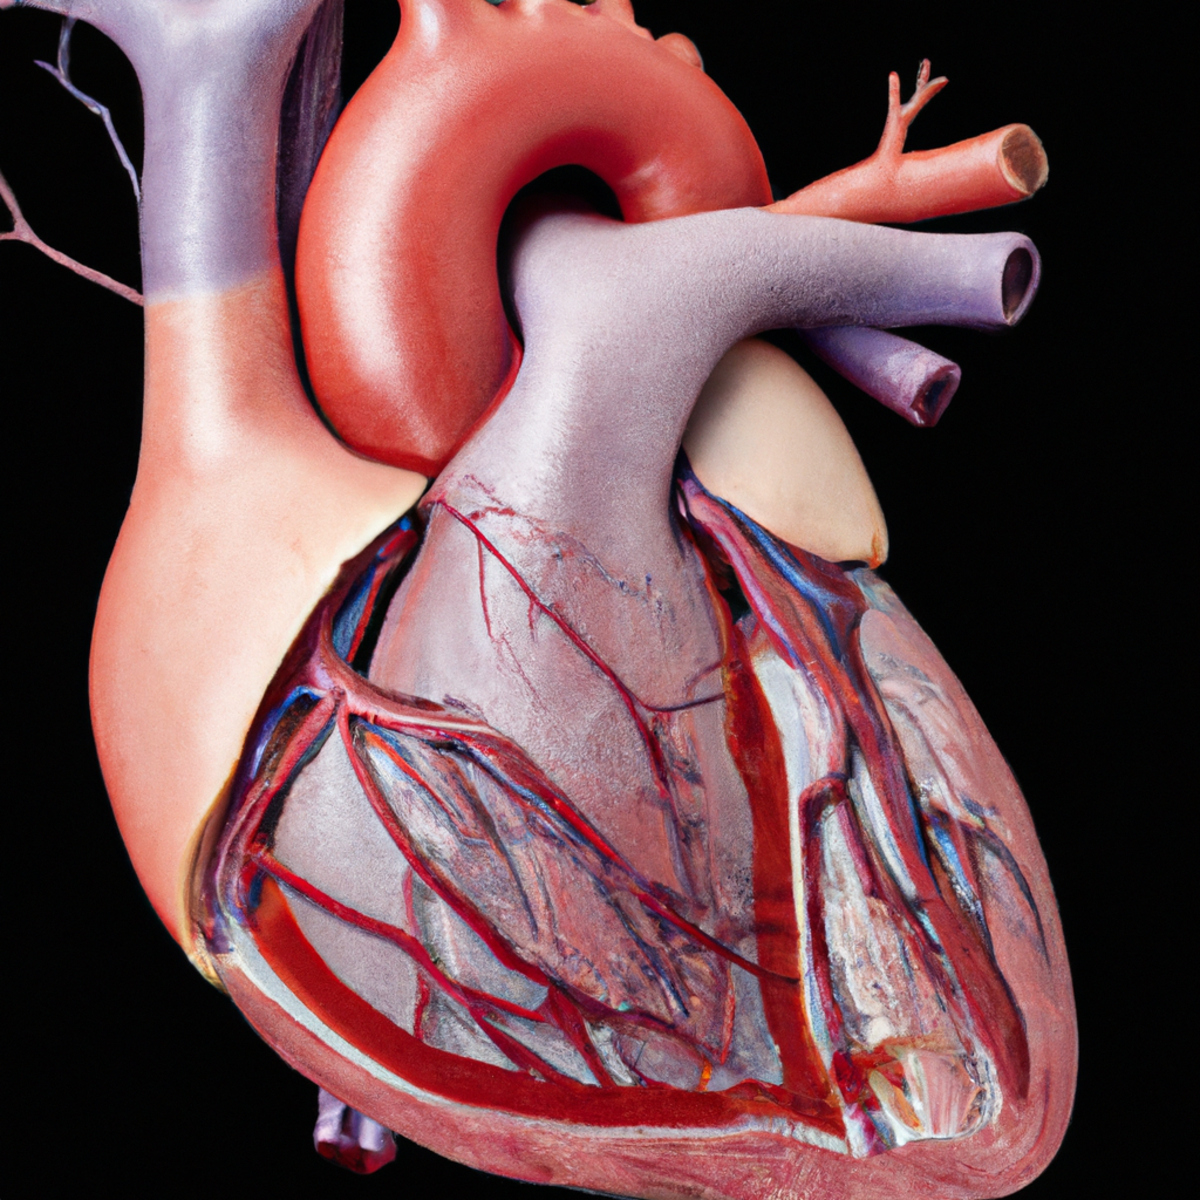 Close-up of human heart specimen with giant cell myocarditis, showcasing inflamed areas and intricate blood vessel network - Giant Cell Myocarditis